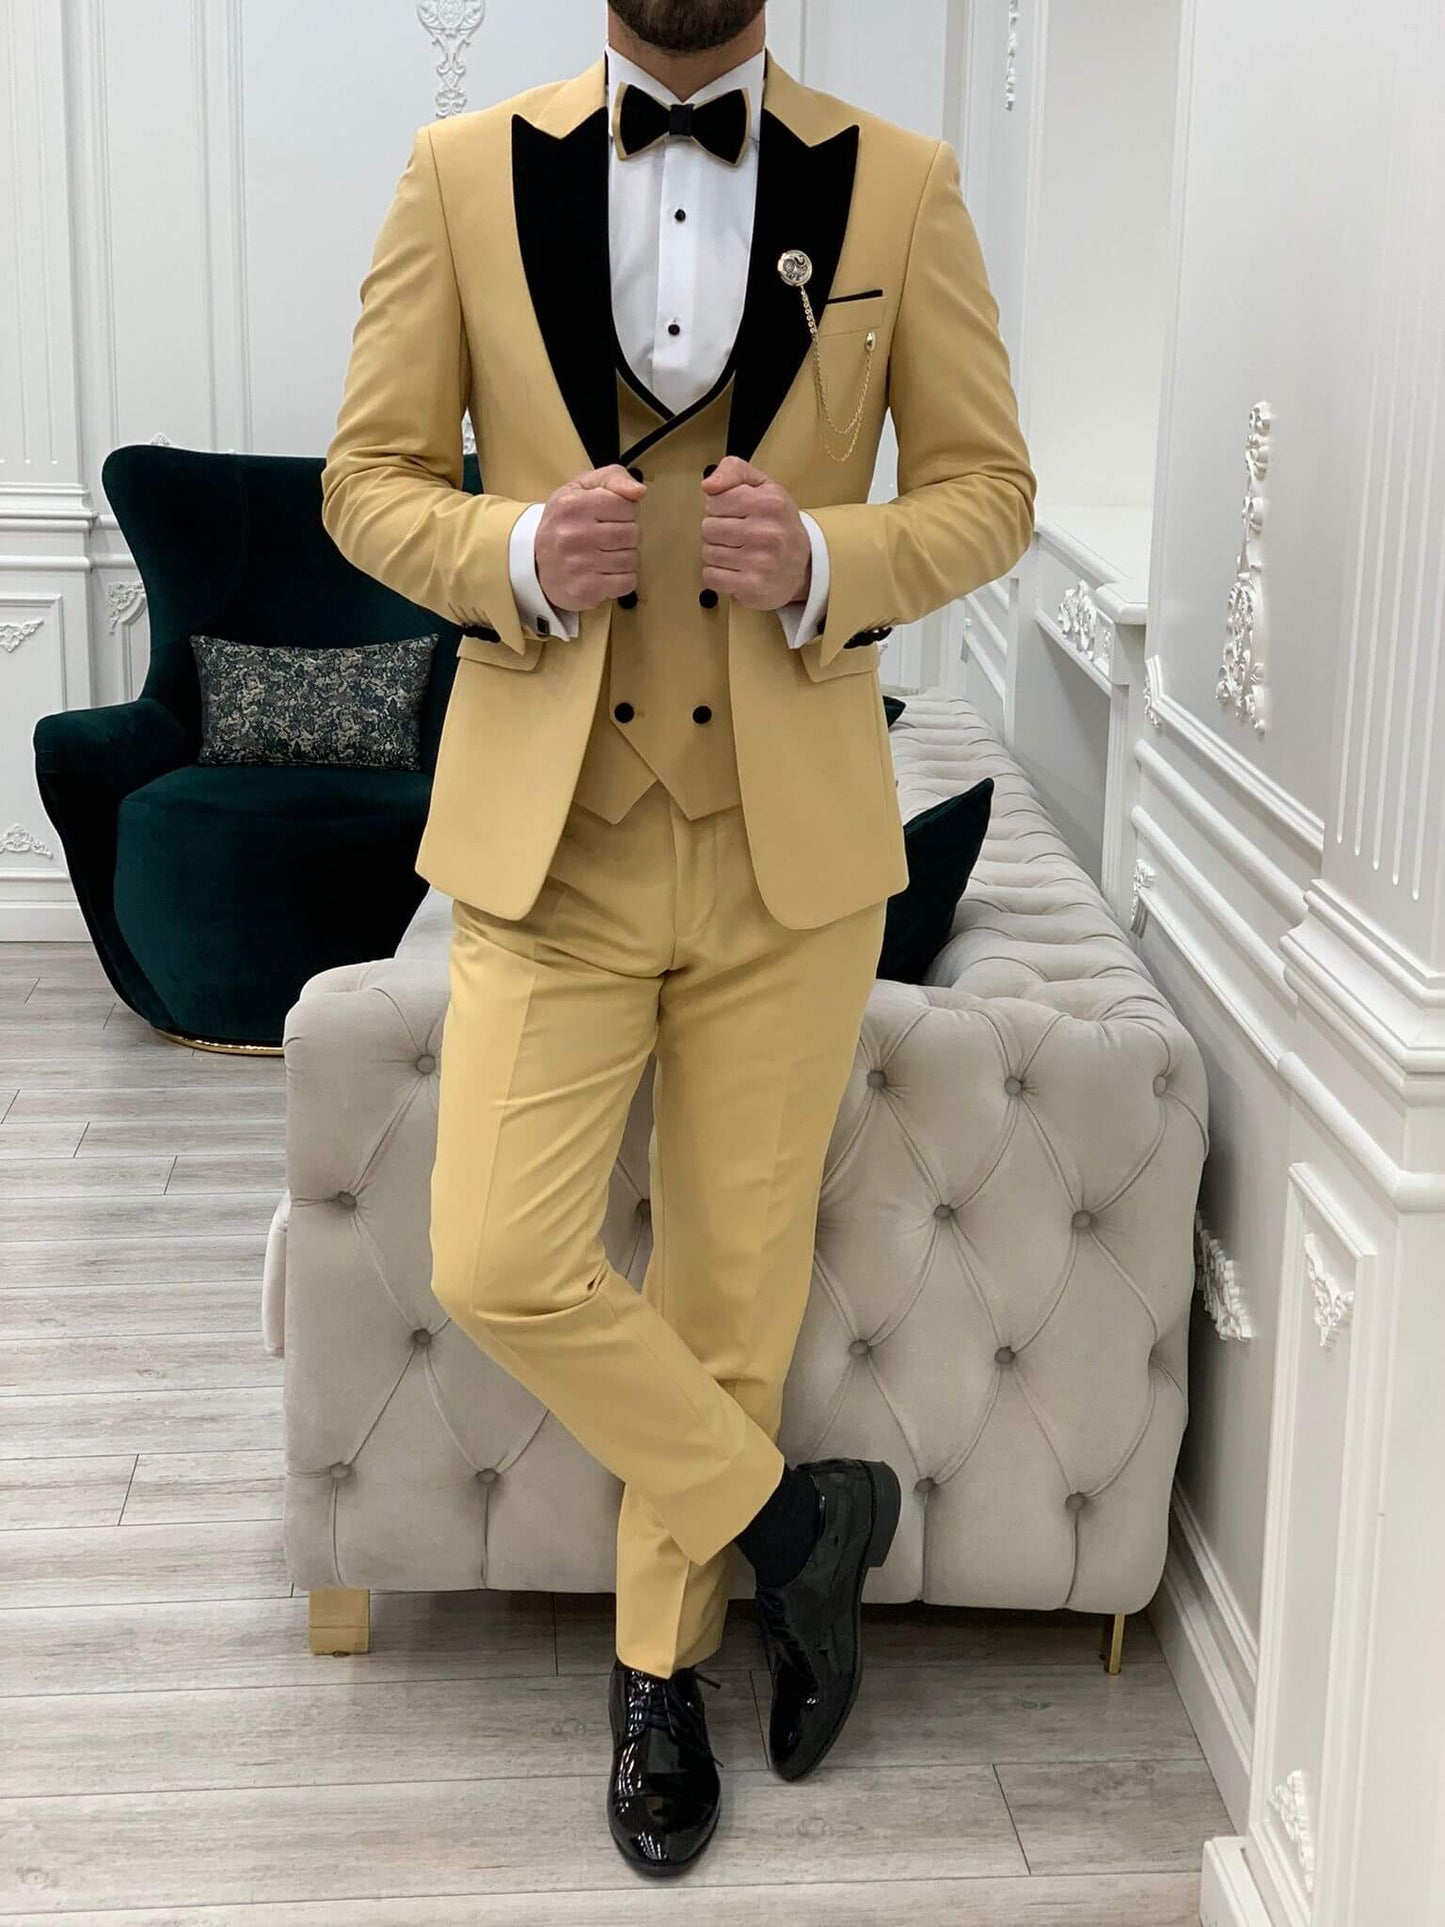 Model Wearing Yellow Tuxedo with Peak Lapel, Single Button, Double Slit, Slim-Fit Italian Cut at Formal Event